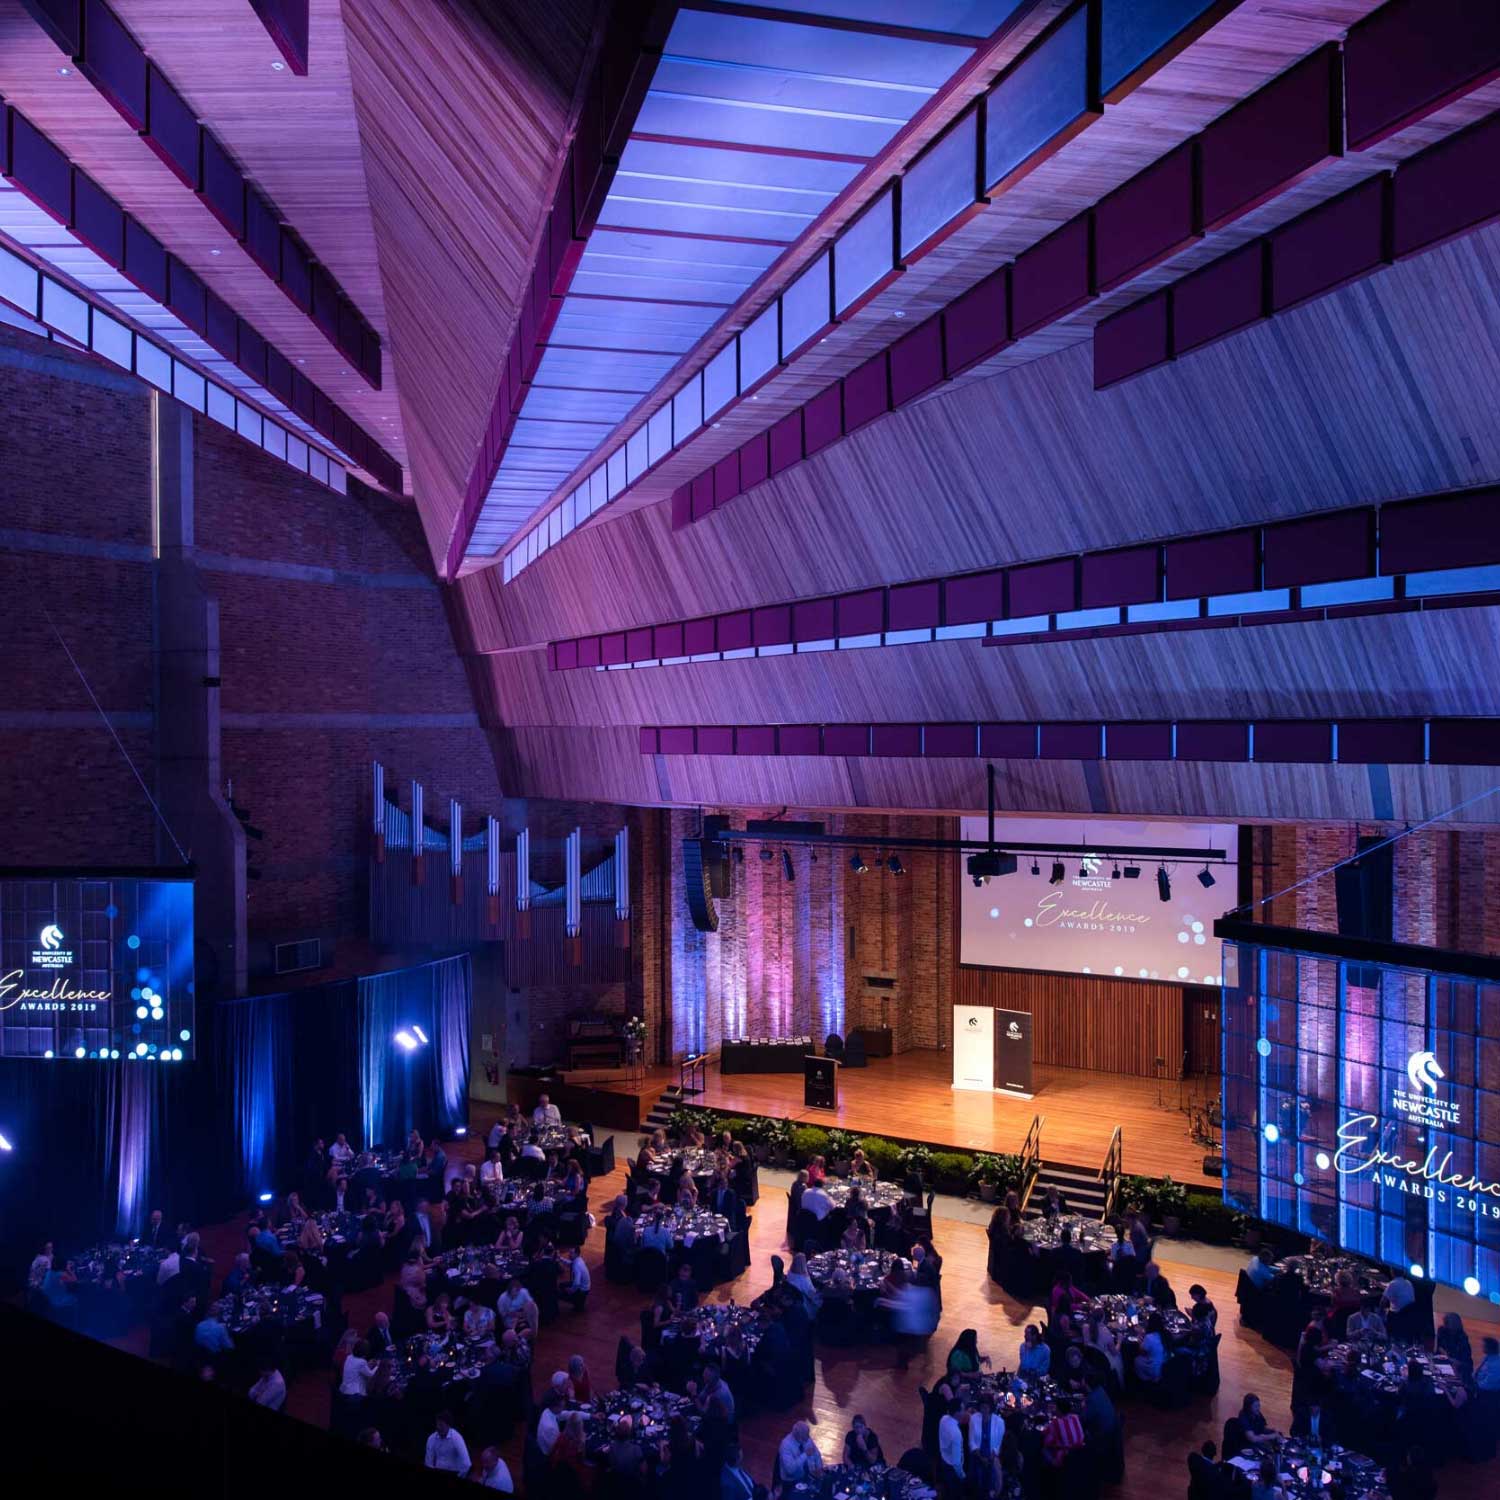 The Great Hall for Excellence Awards